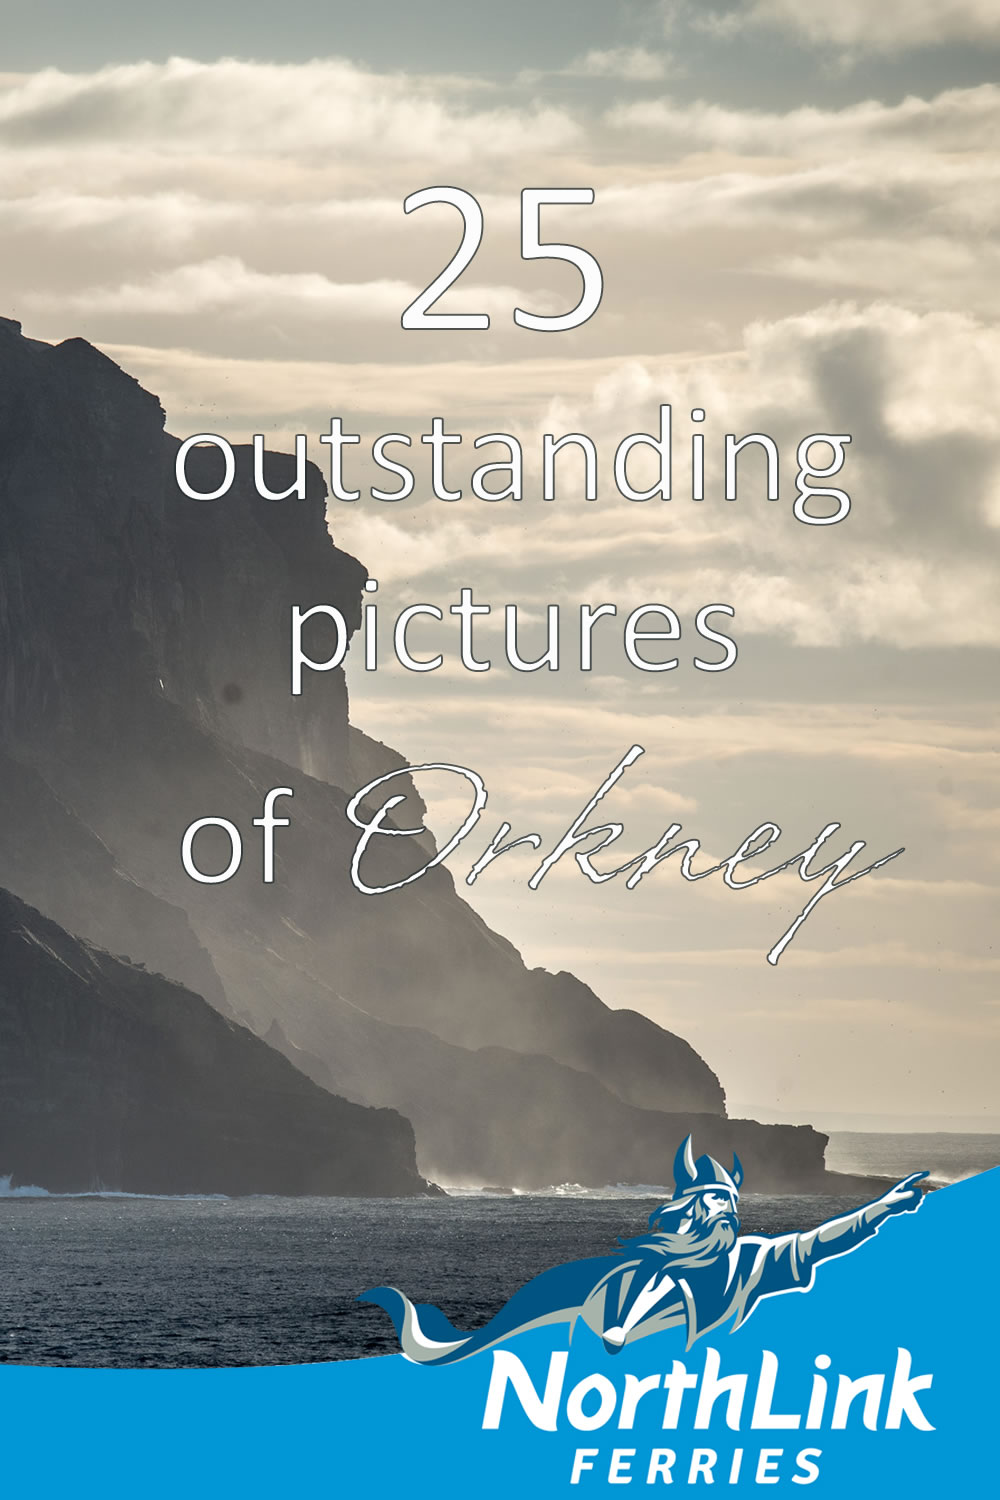 25 outstanding pictures of Orkney